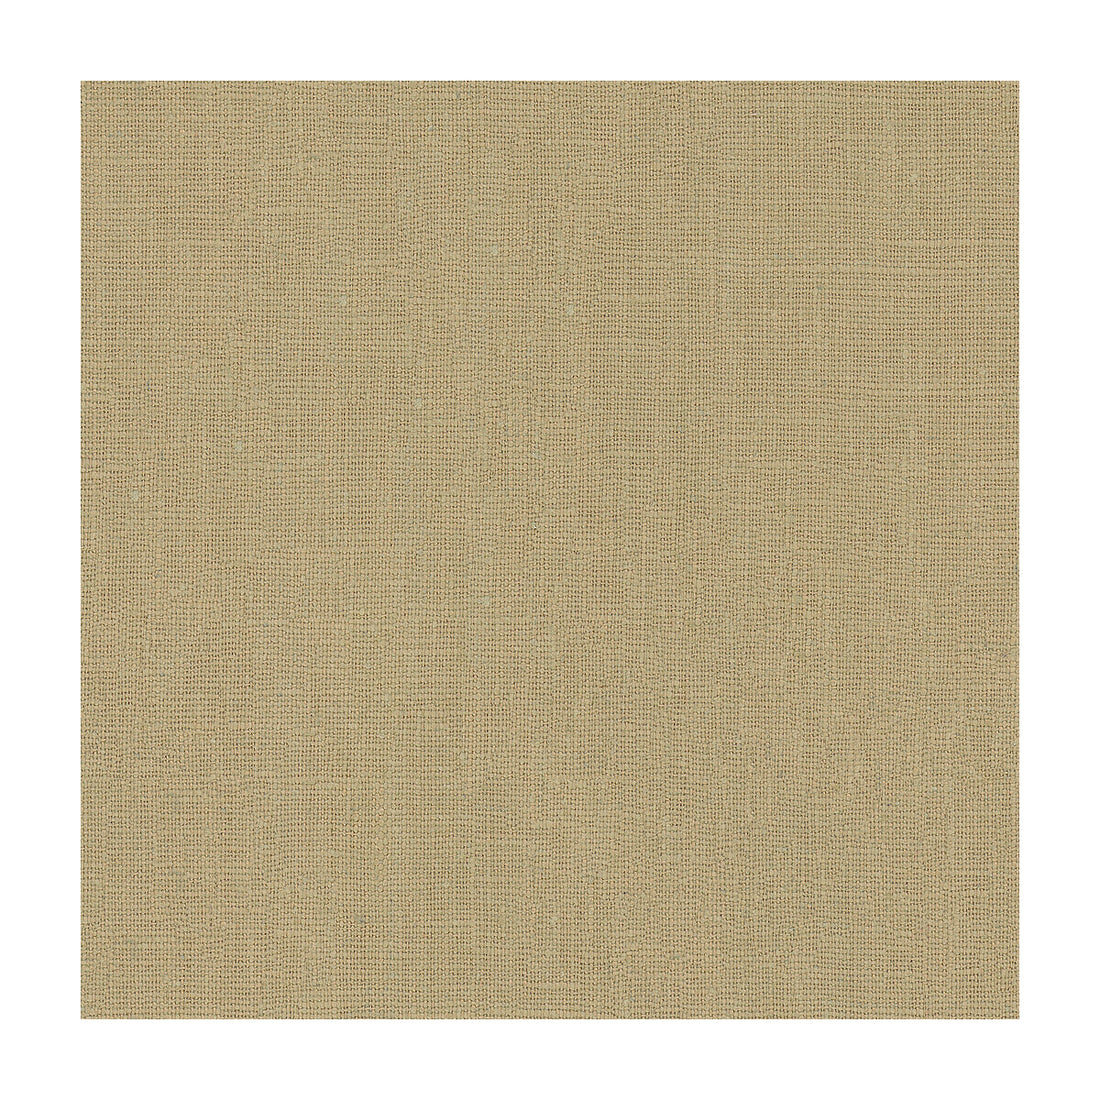 Kravet Basics fabric in 32344-1601 color - pattern 32344.1601.0 - by Kravet Basics in the Perfect Plains collection